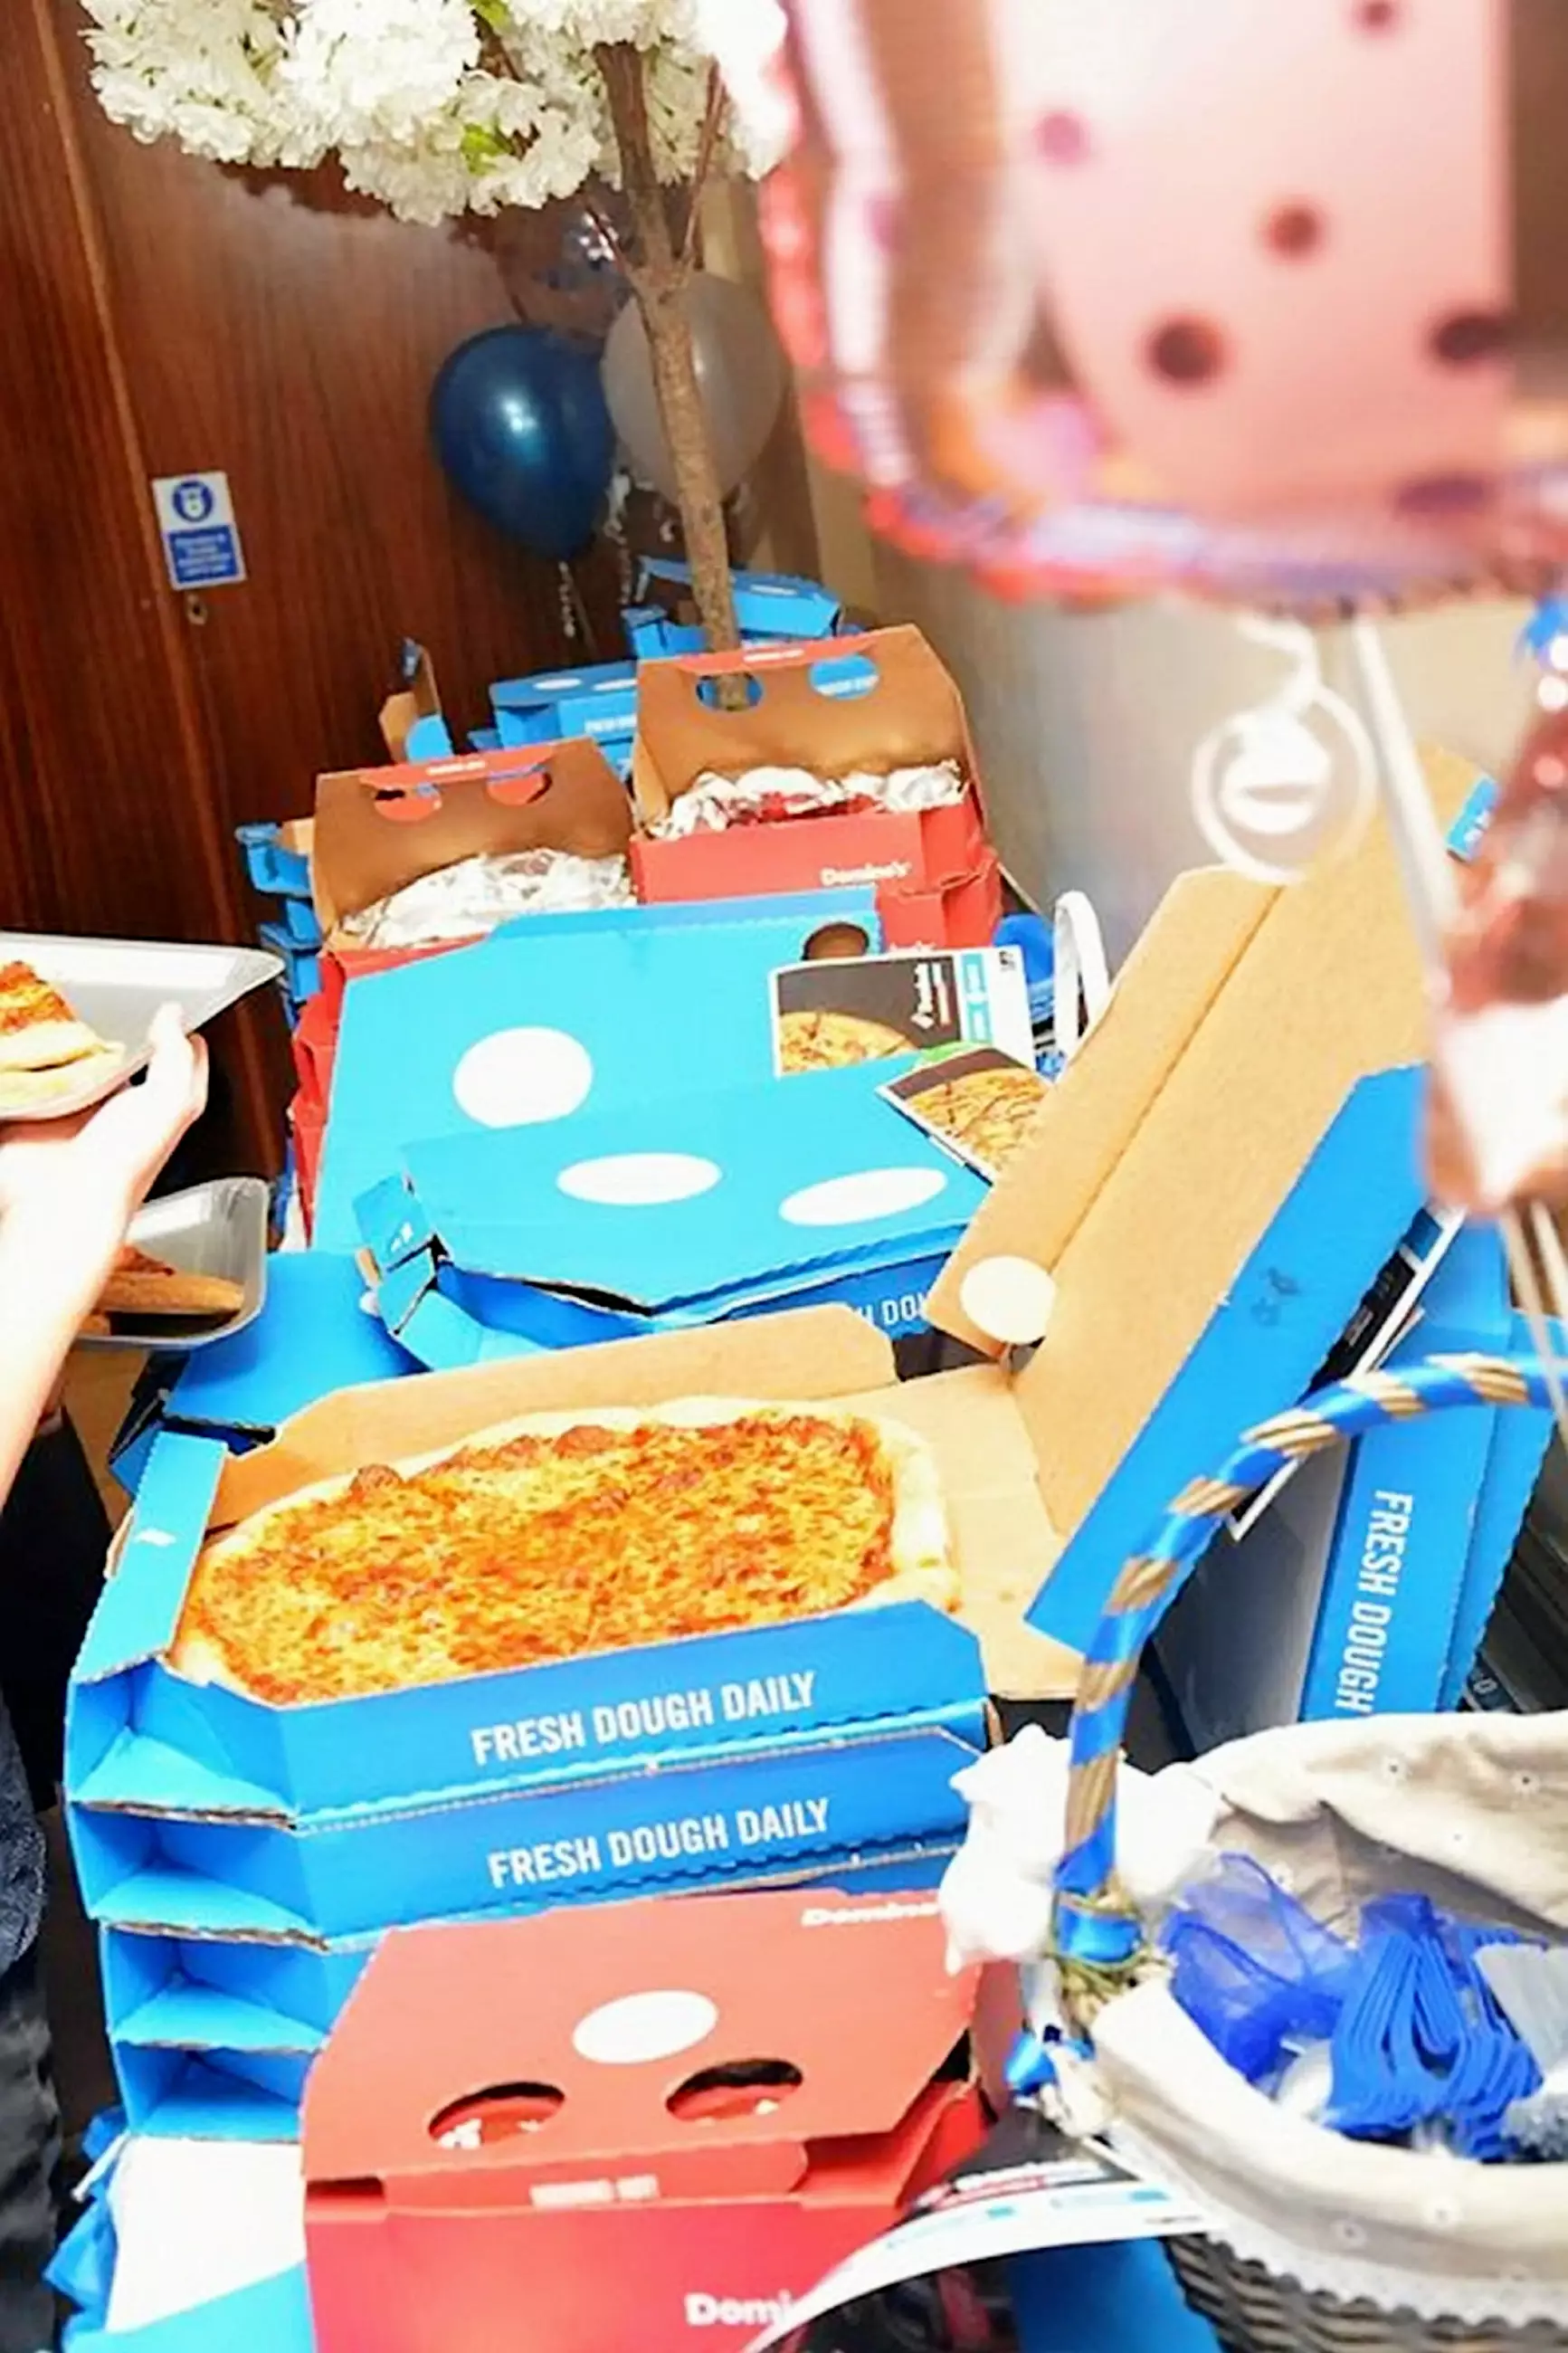 This is what £350 of Domino's looks like.